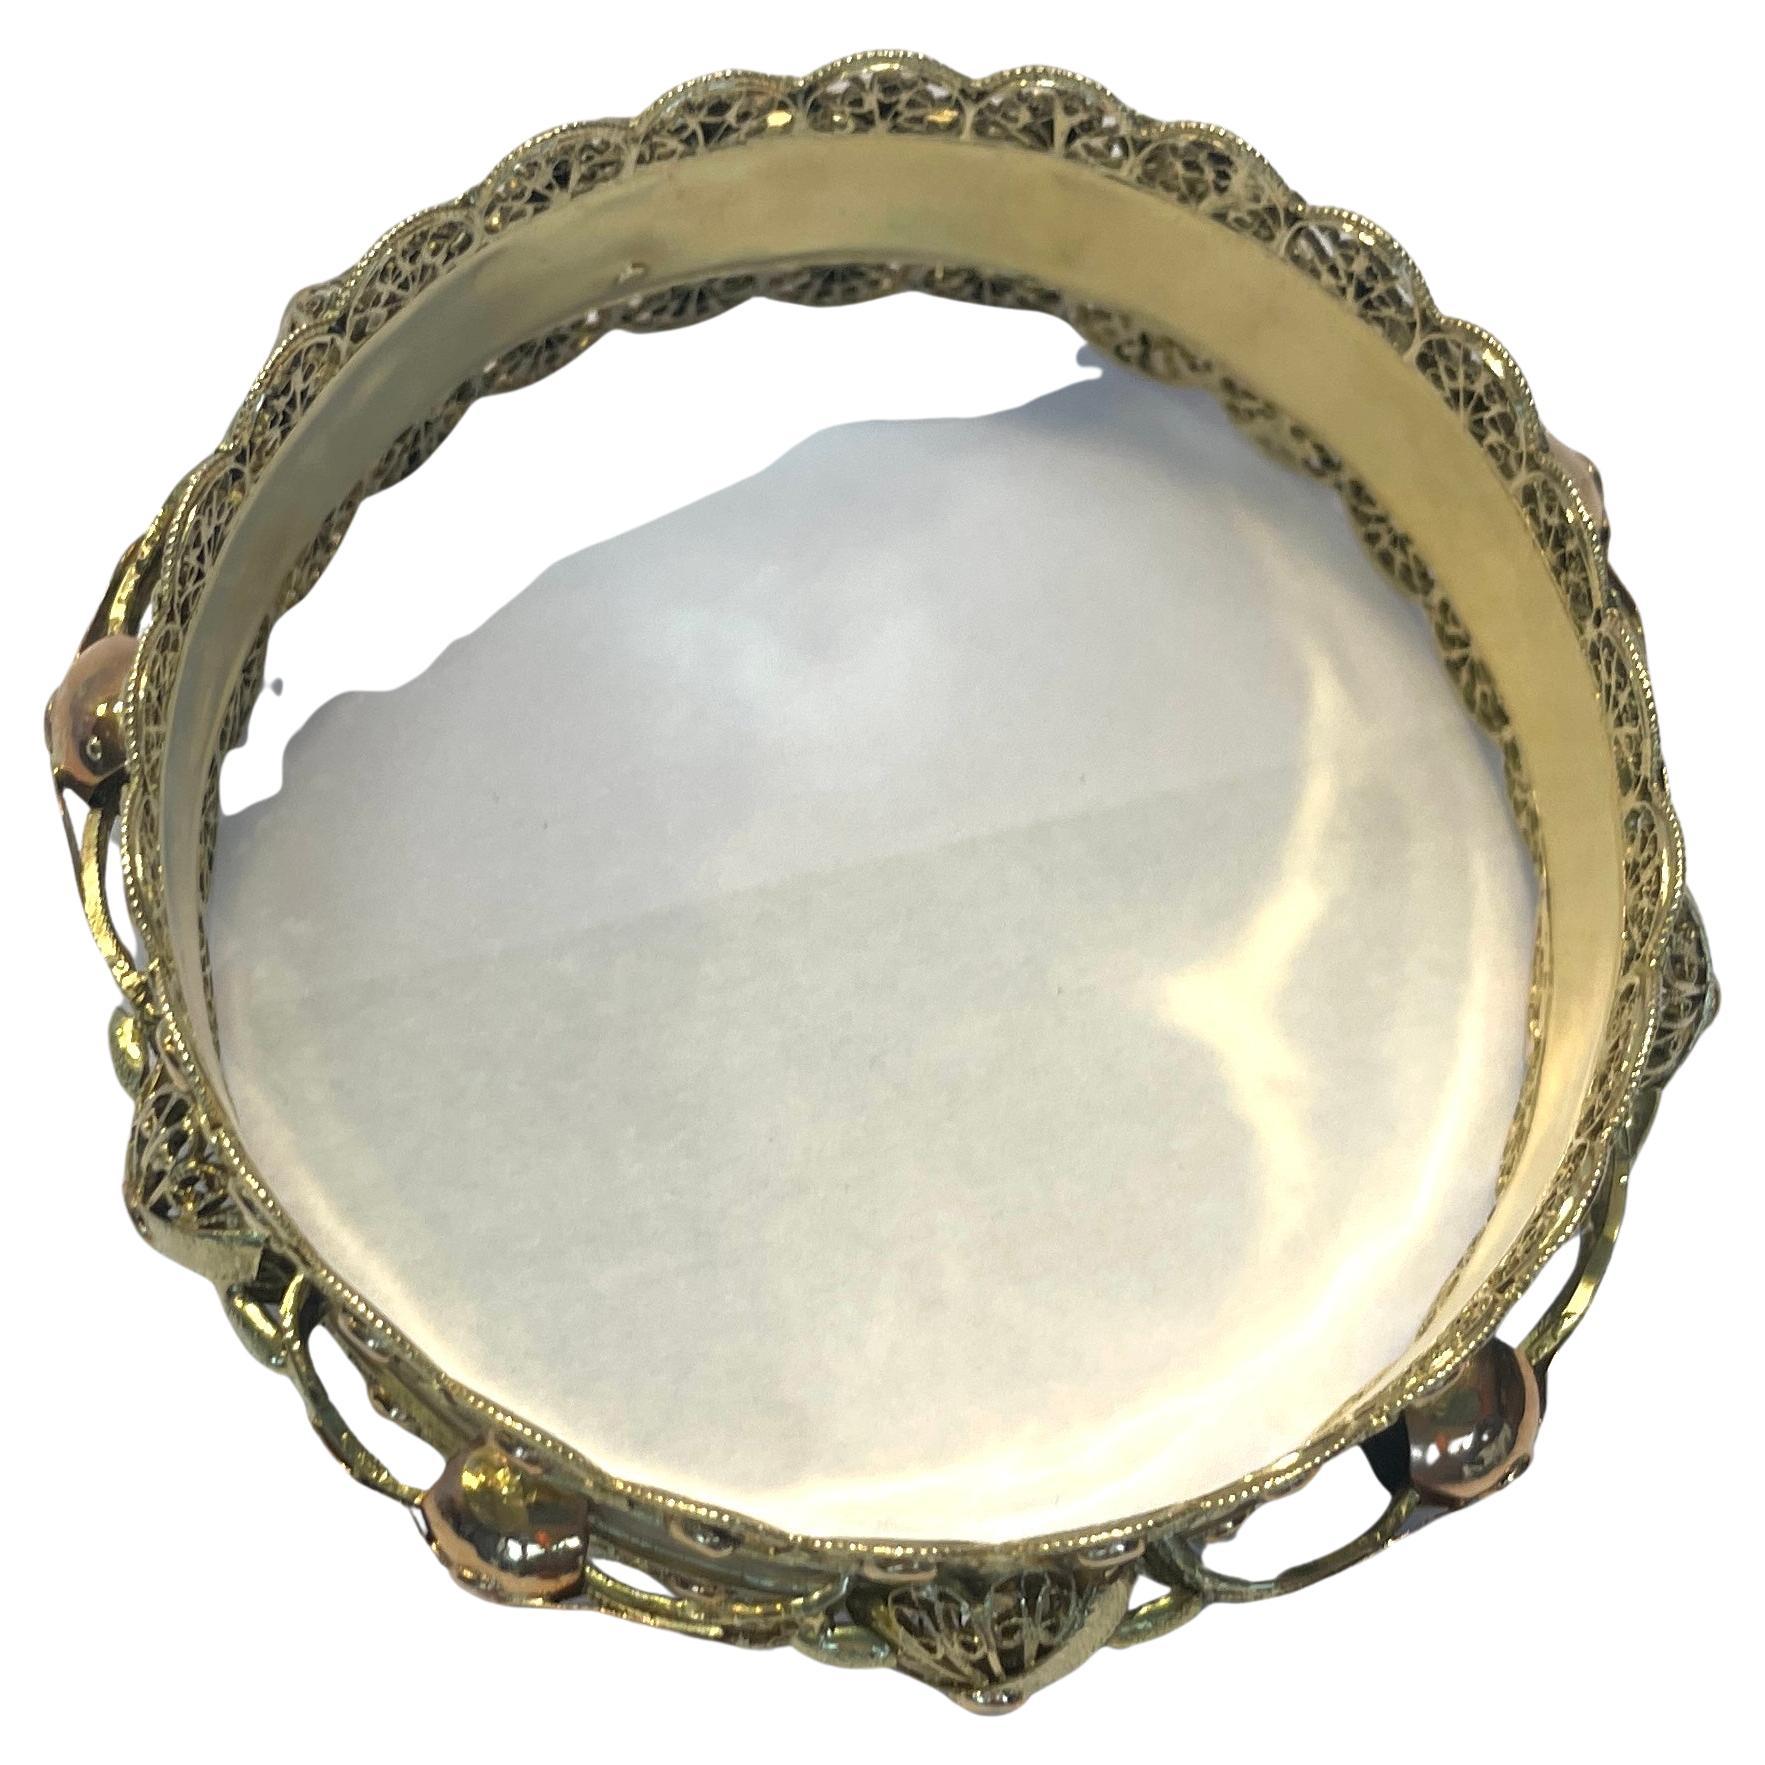 Antique Victorian 2 tone Rose Gold French Oriental Bangle Bracelet 18 Karat.
An exceptional example of antique fine Victorian Colonial style jewellery well done in Oriental design. 
The piece has a circumference of just over 8 inches. 
It is just